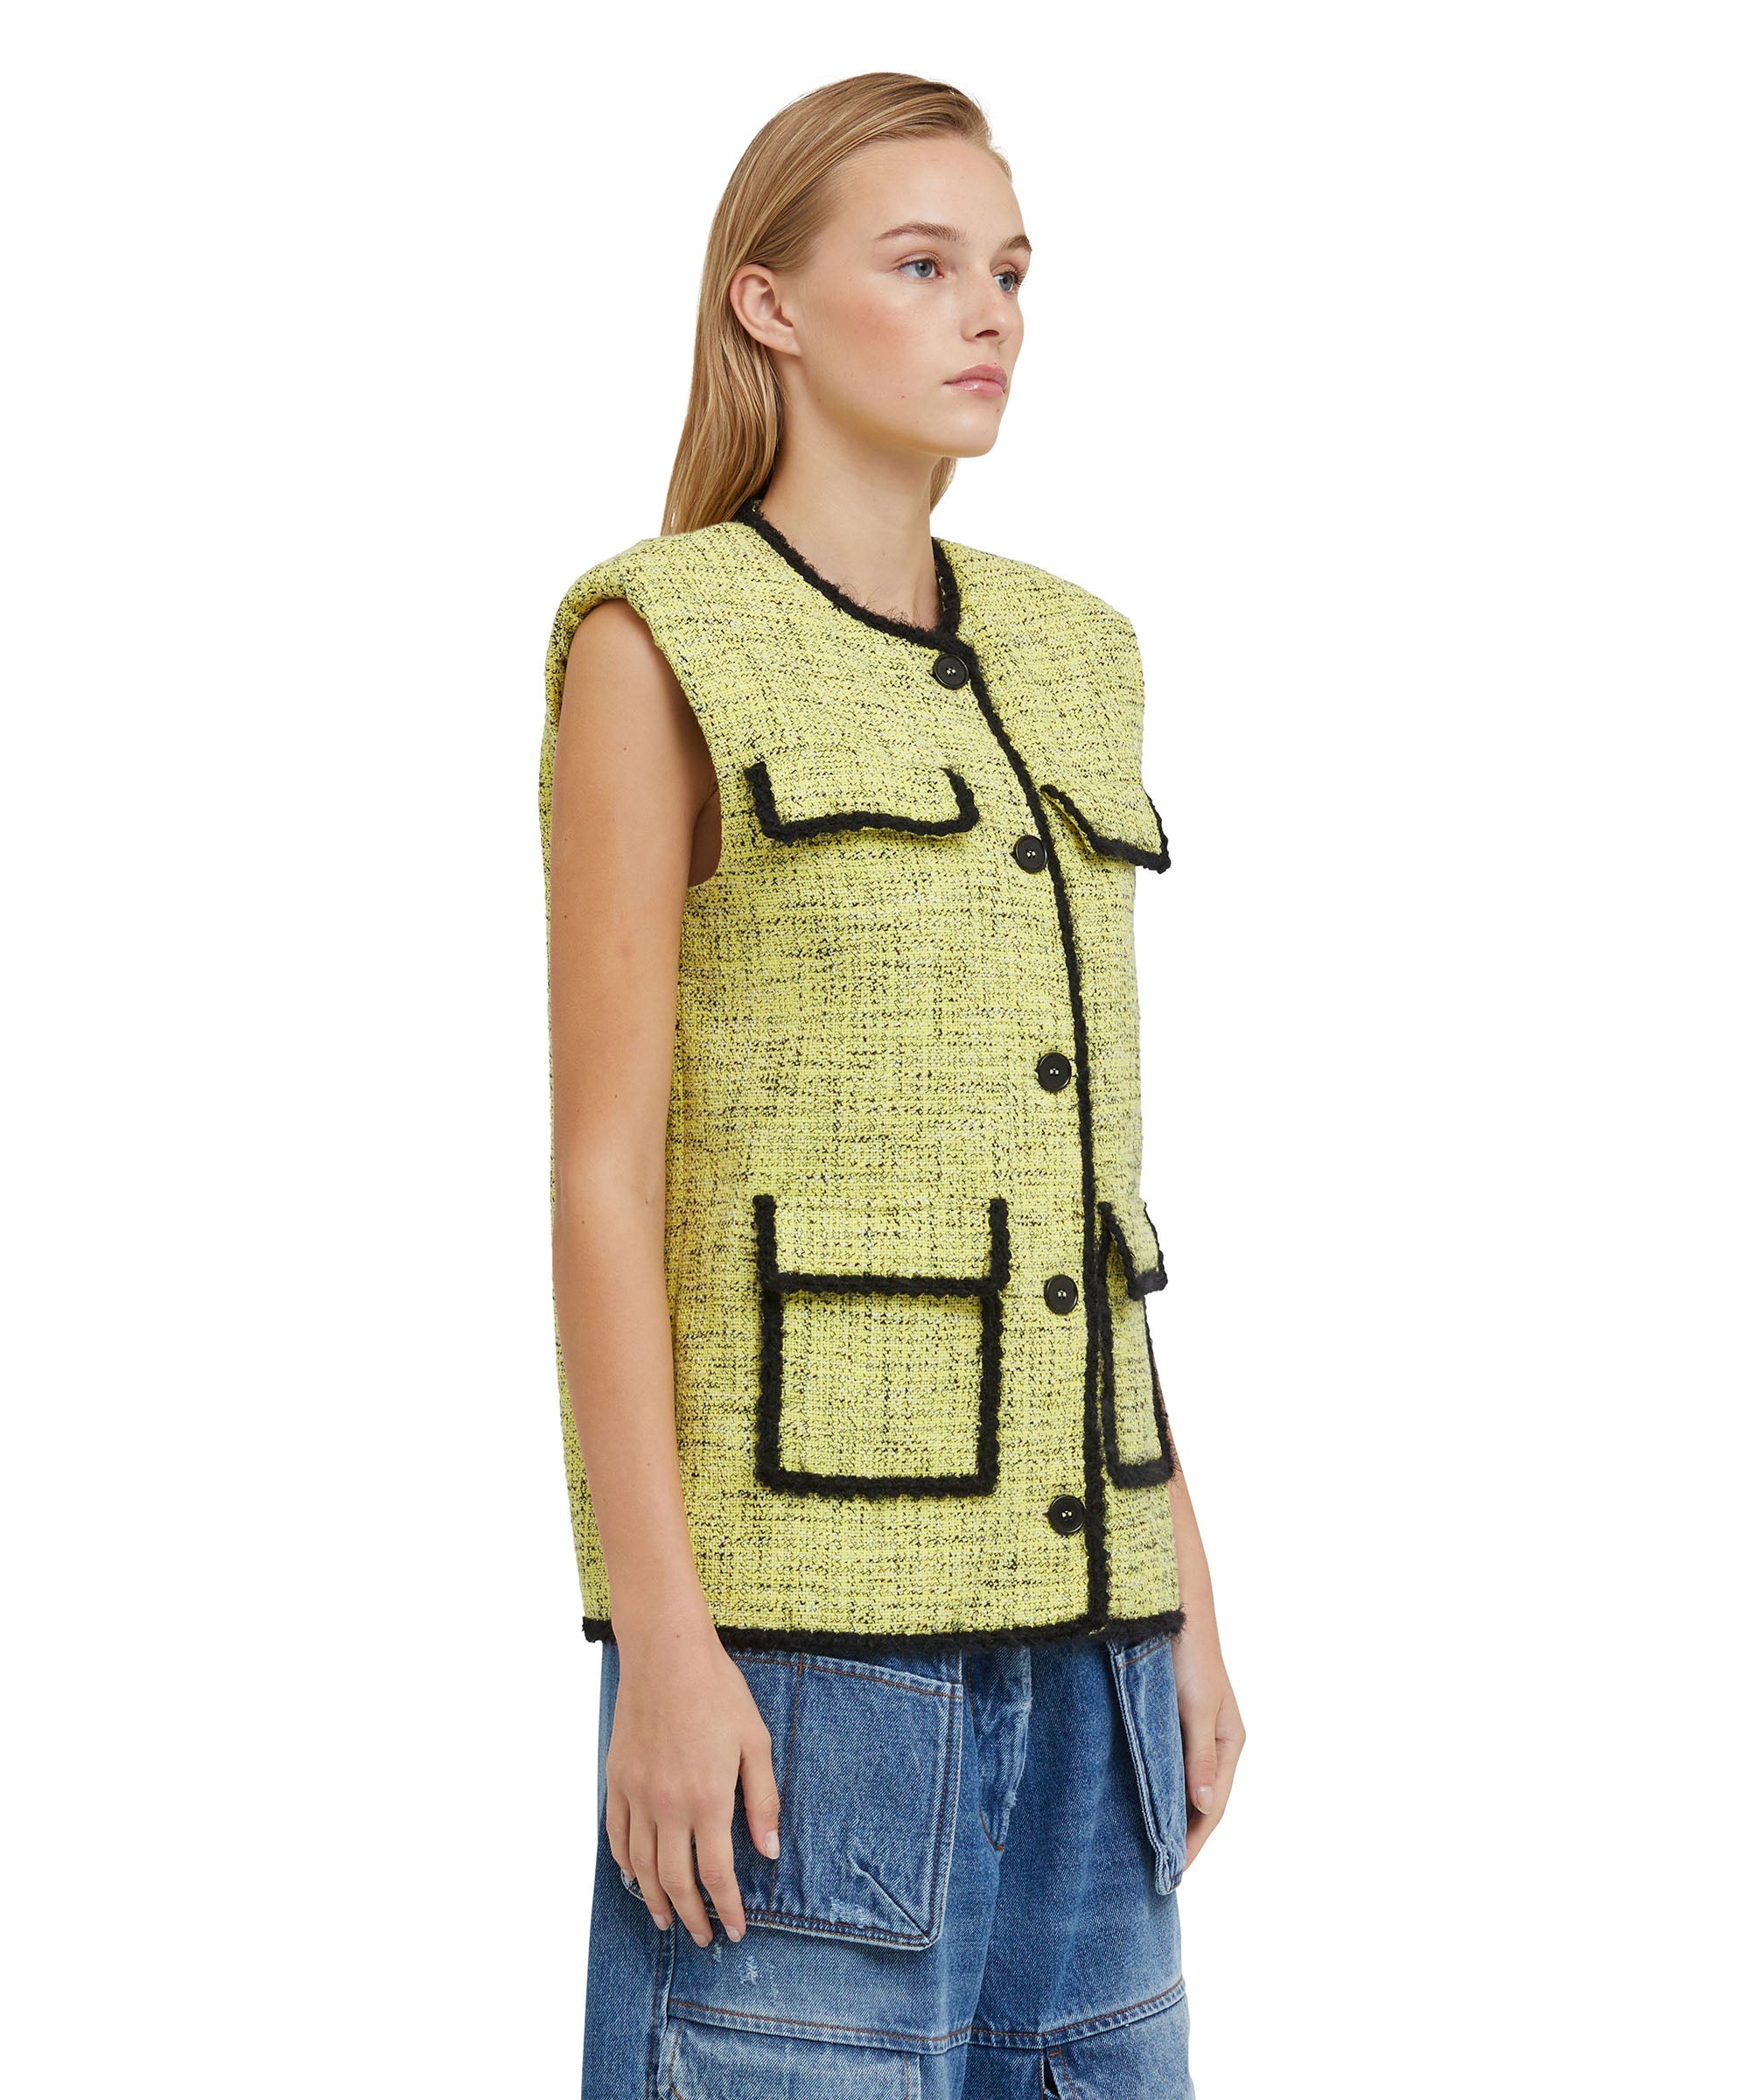 Salt and pepper tweed sleeveless jacket with pockets - 4